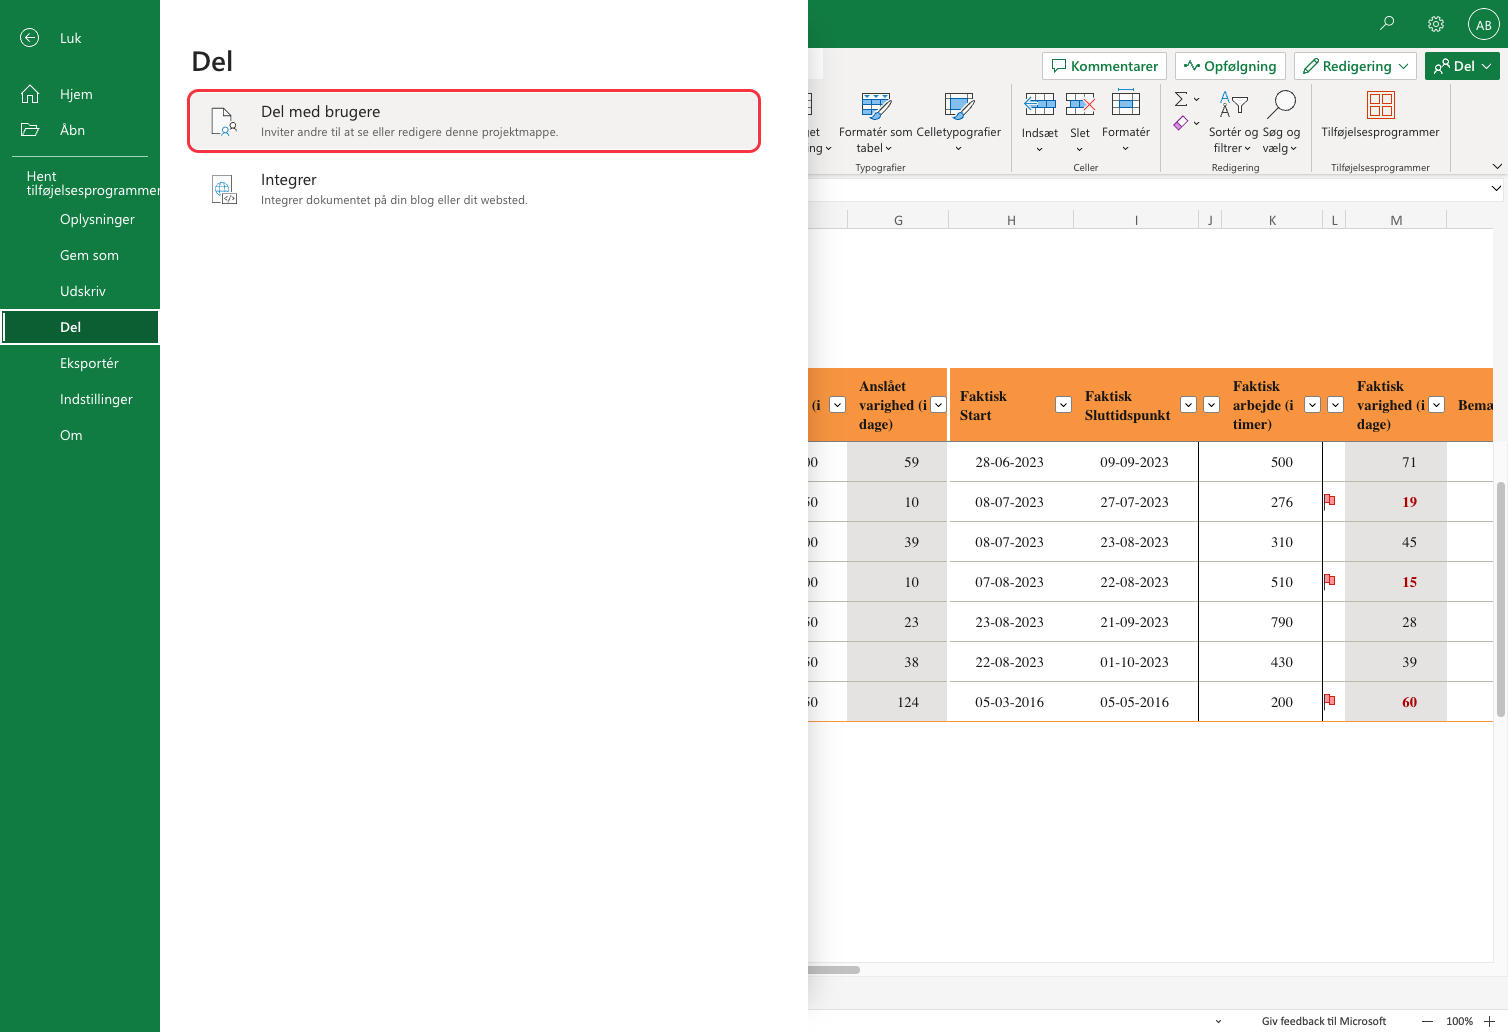 Microsoft Excel interface displaying a menu for sharing options with an open spreadsheet containing project planning details and timelines.